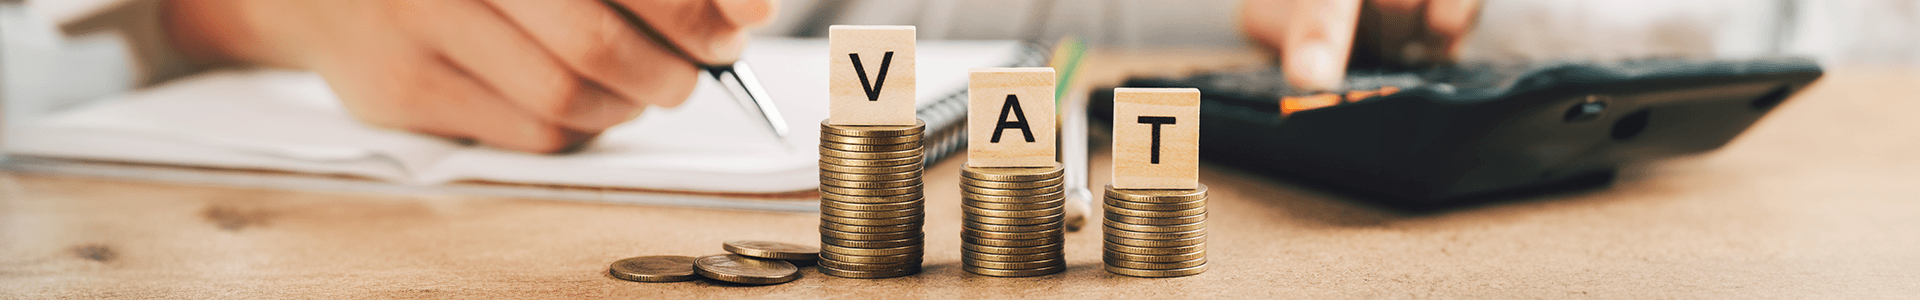 10 Essential Practices for Accurate and Timely VAT Return Preparation